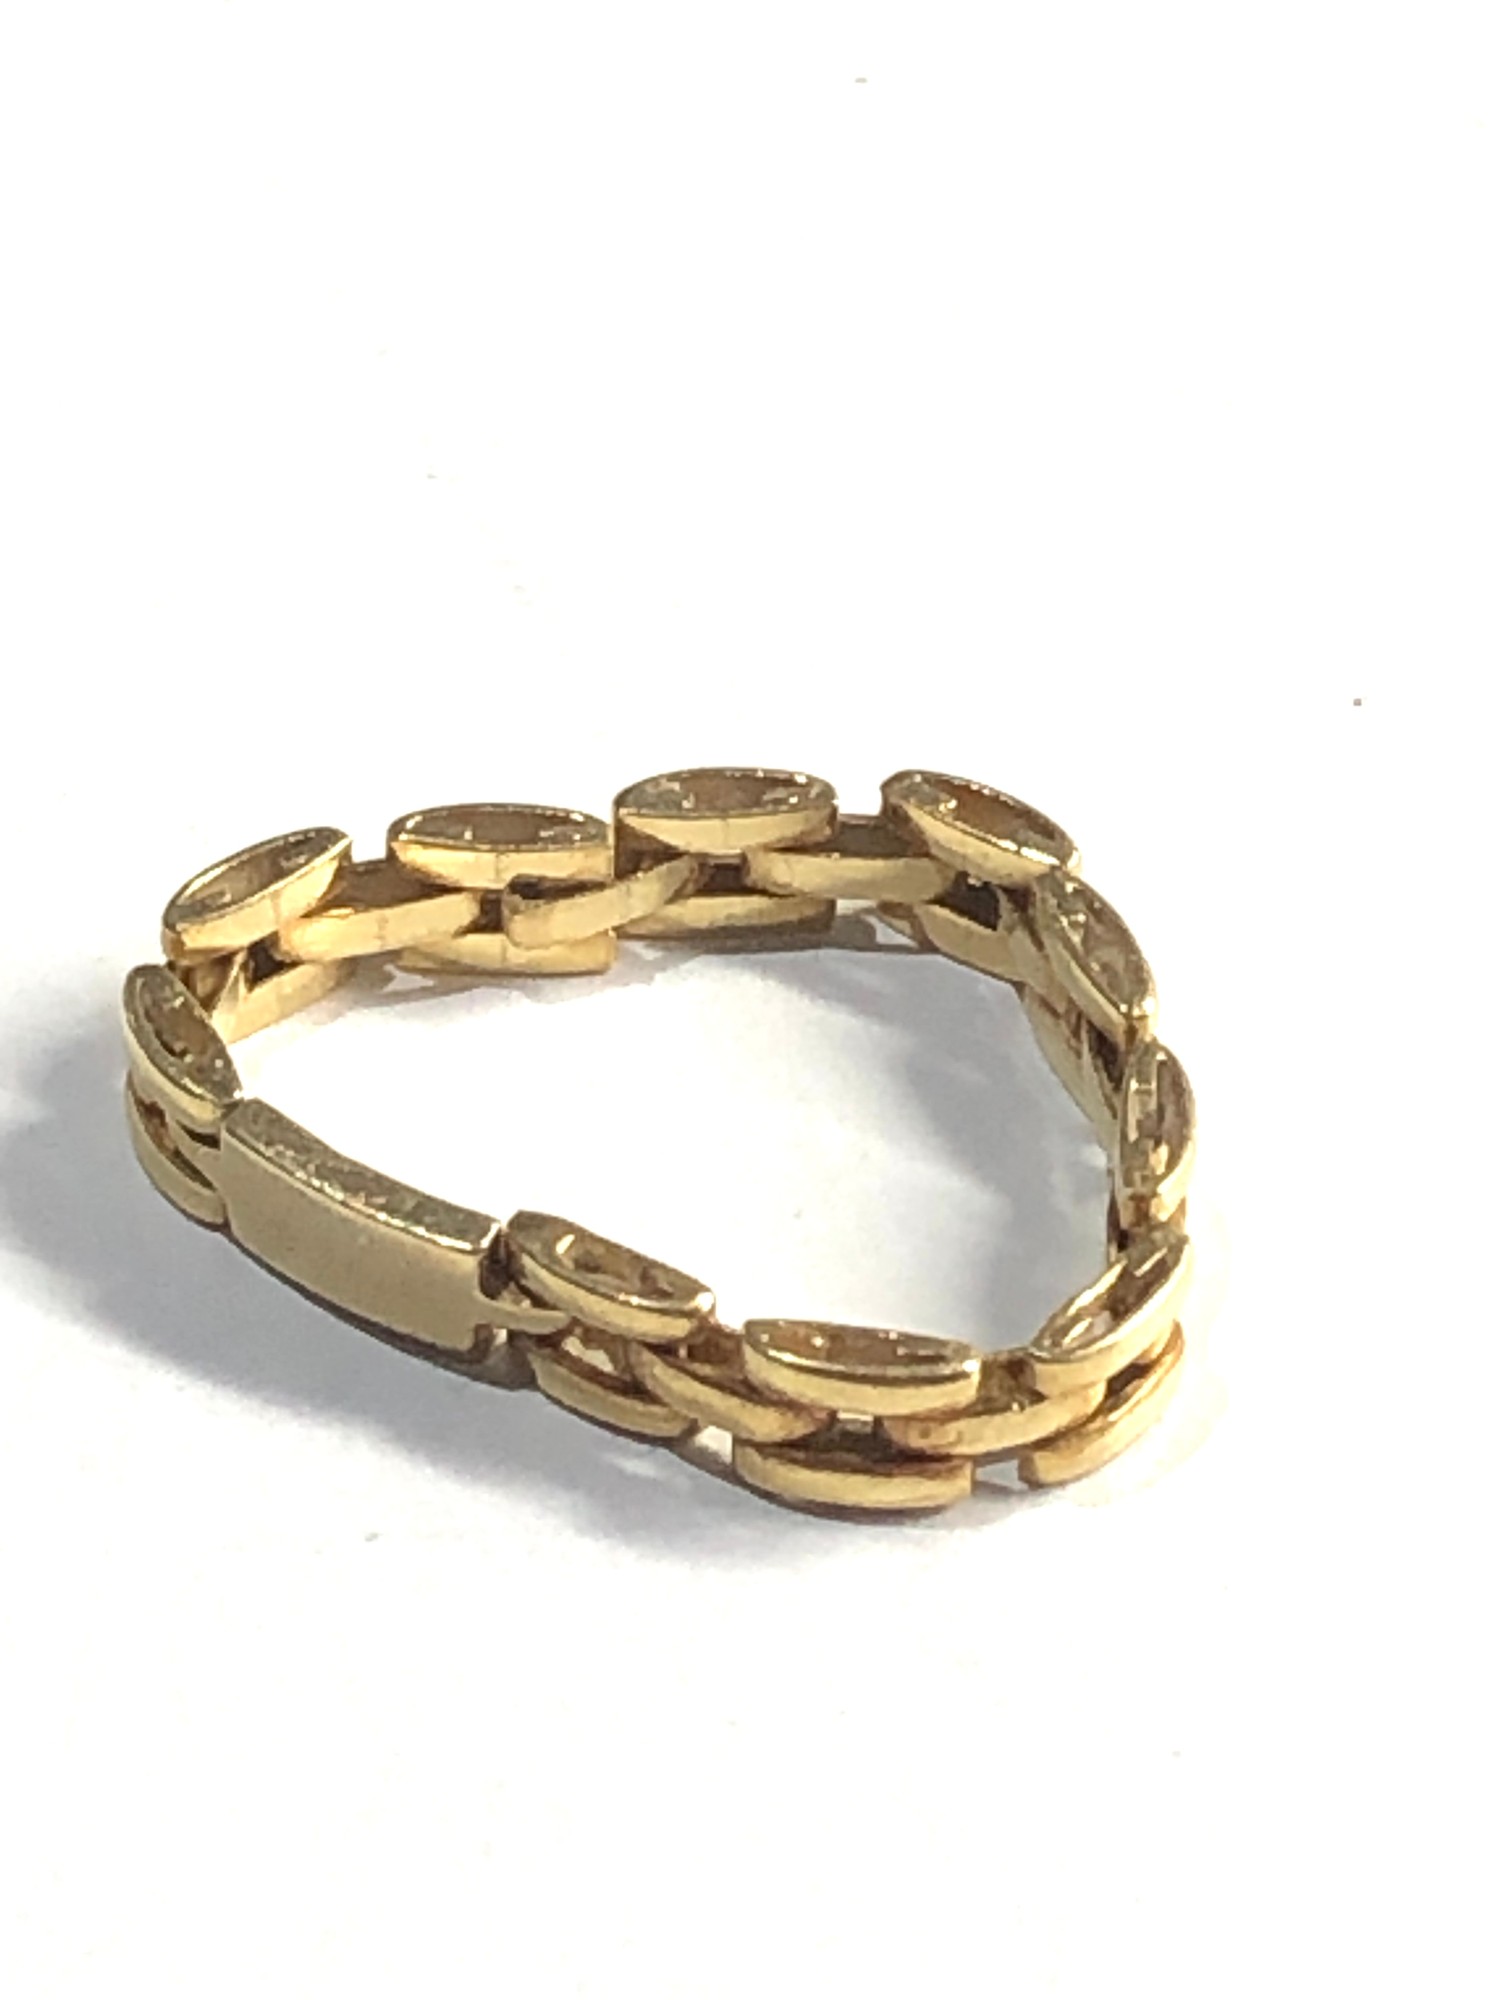 18ct gold chain ring weight 2.5g - Image 2 of 3